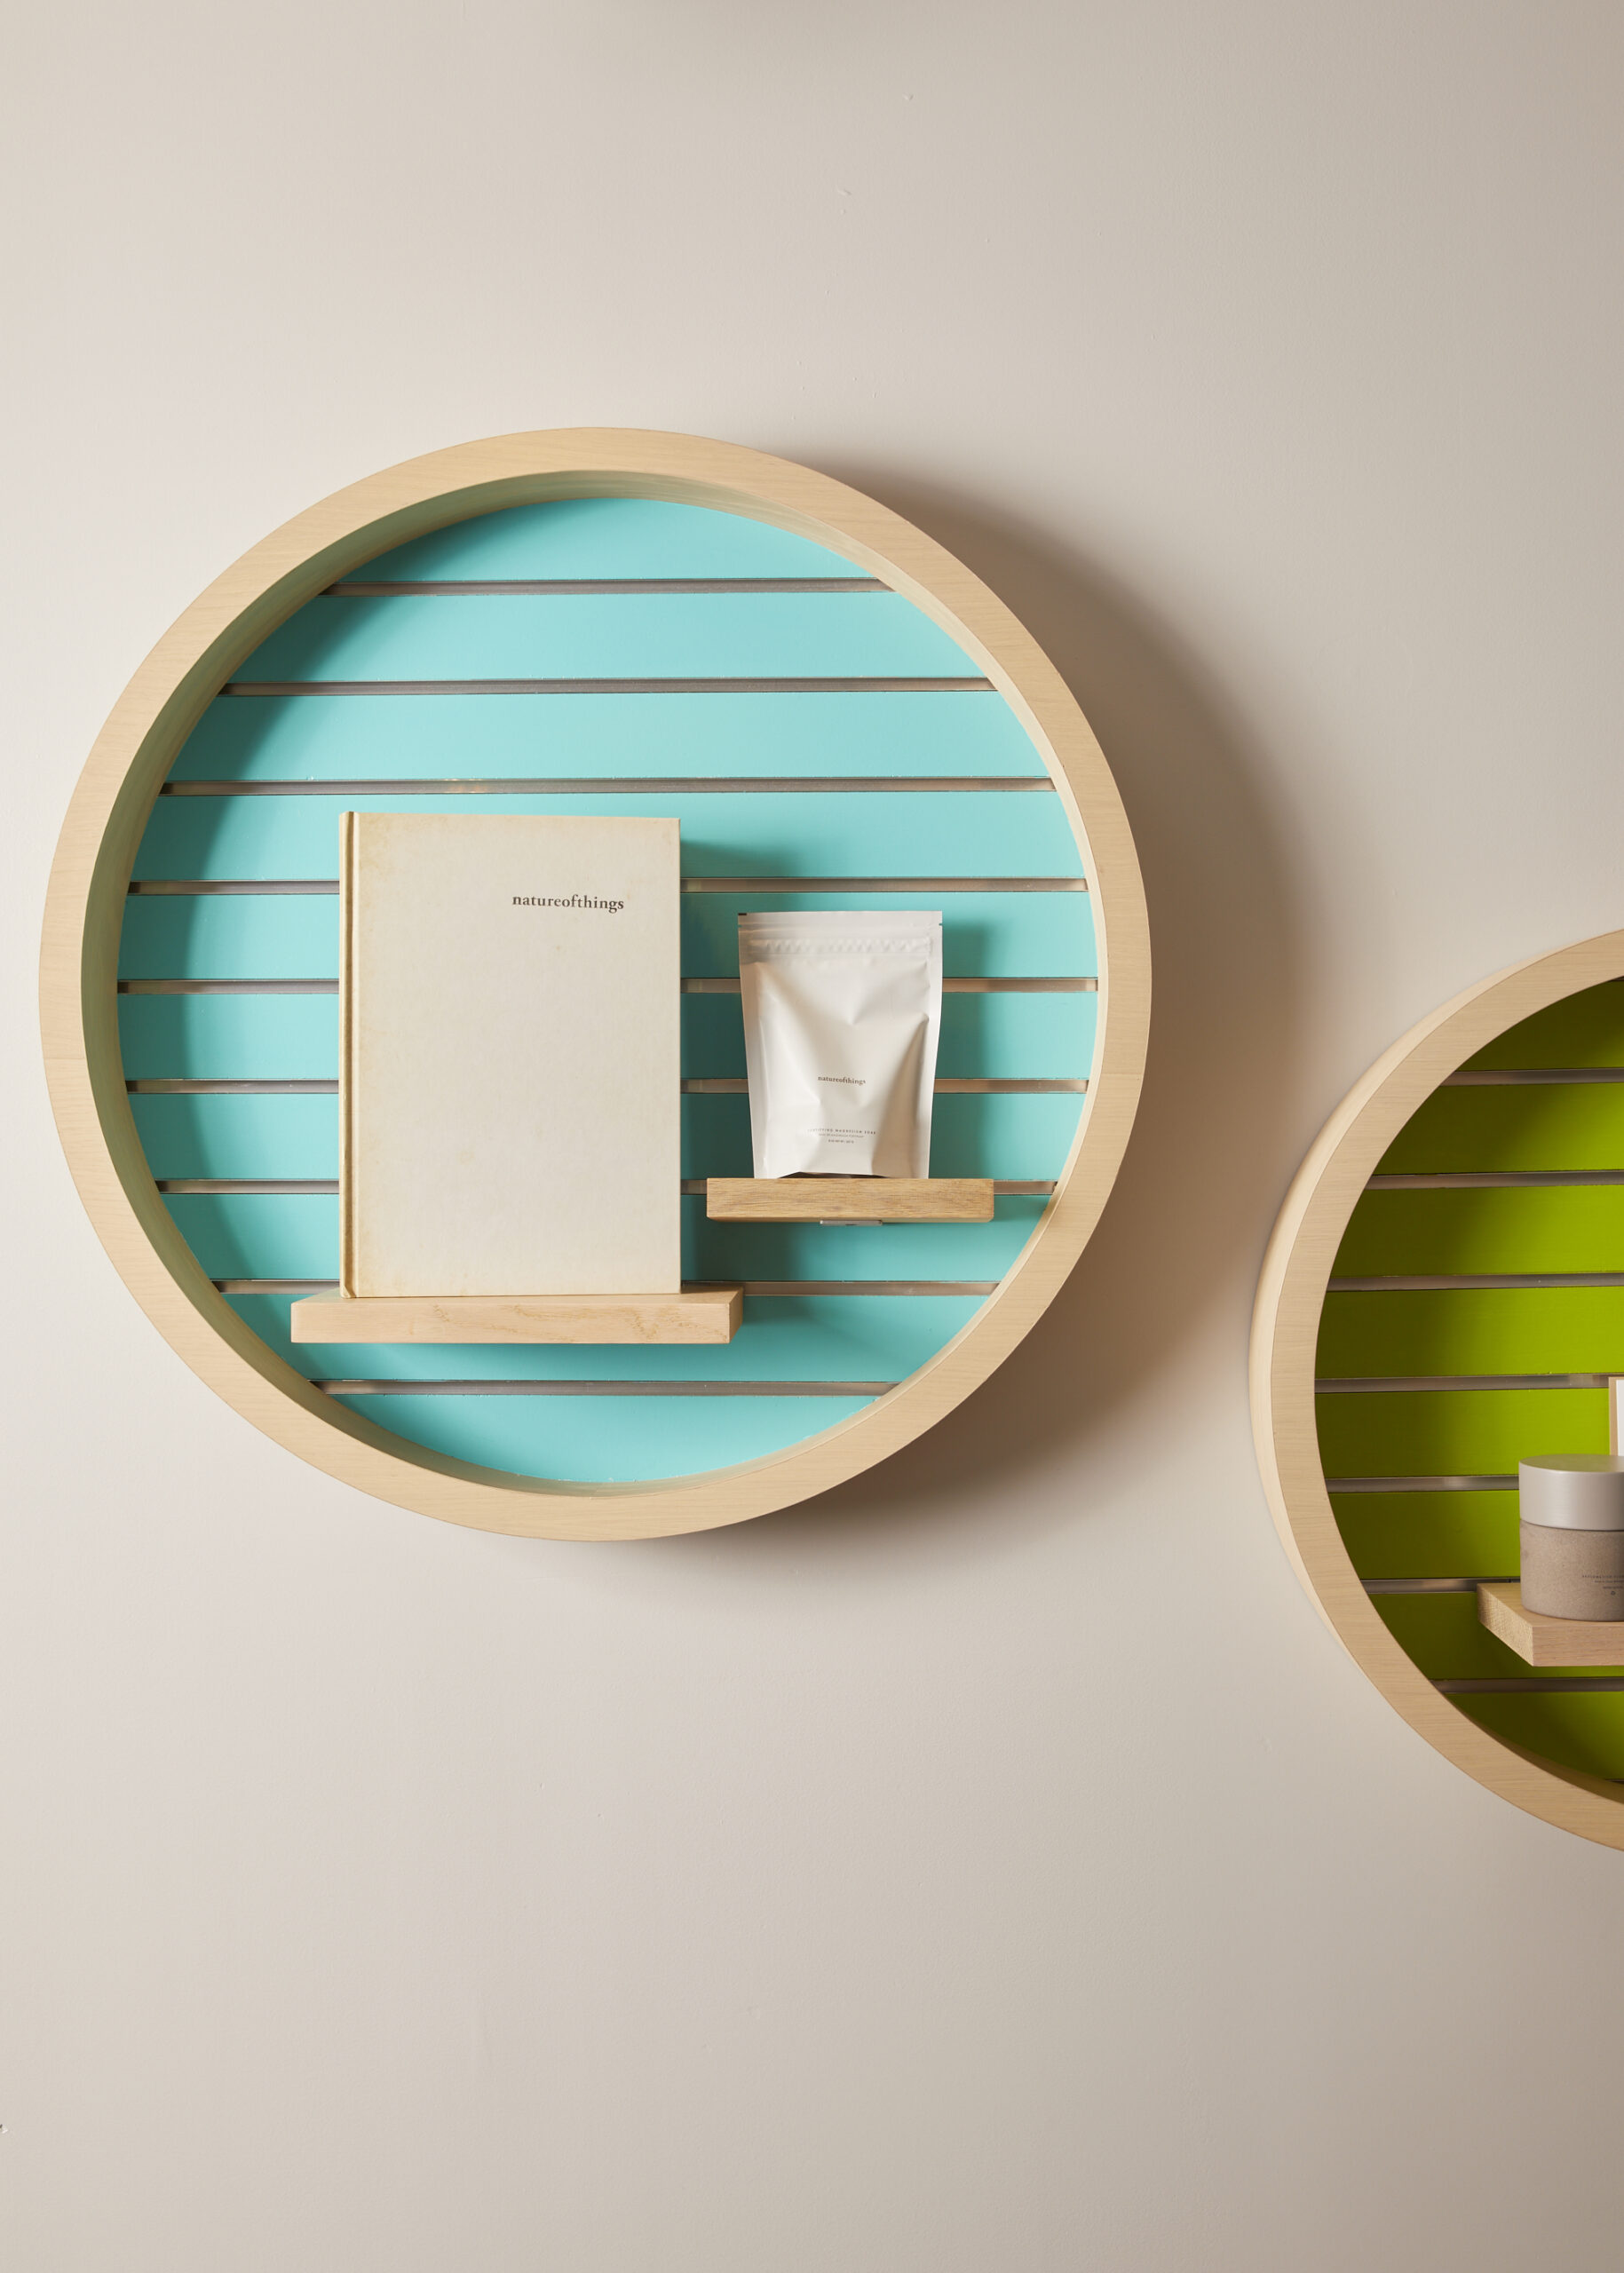 teal circular floating shelf with beige products displayed in the center